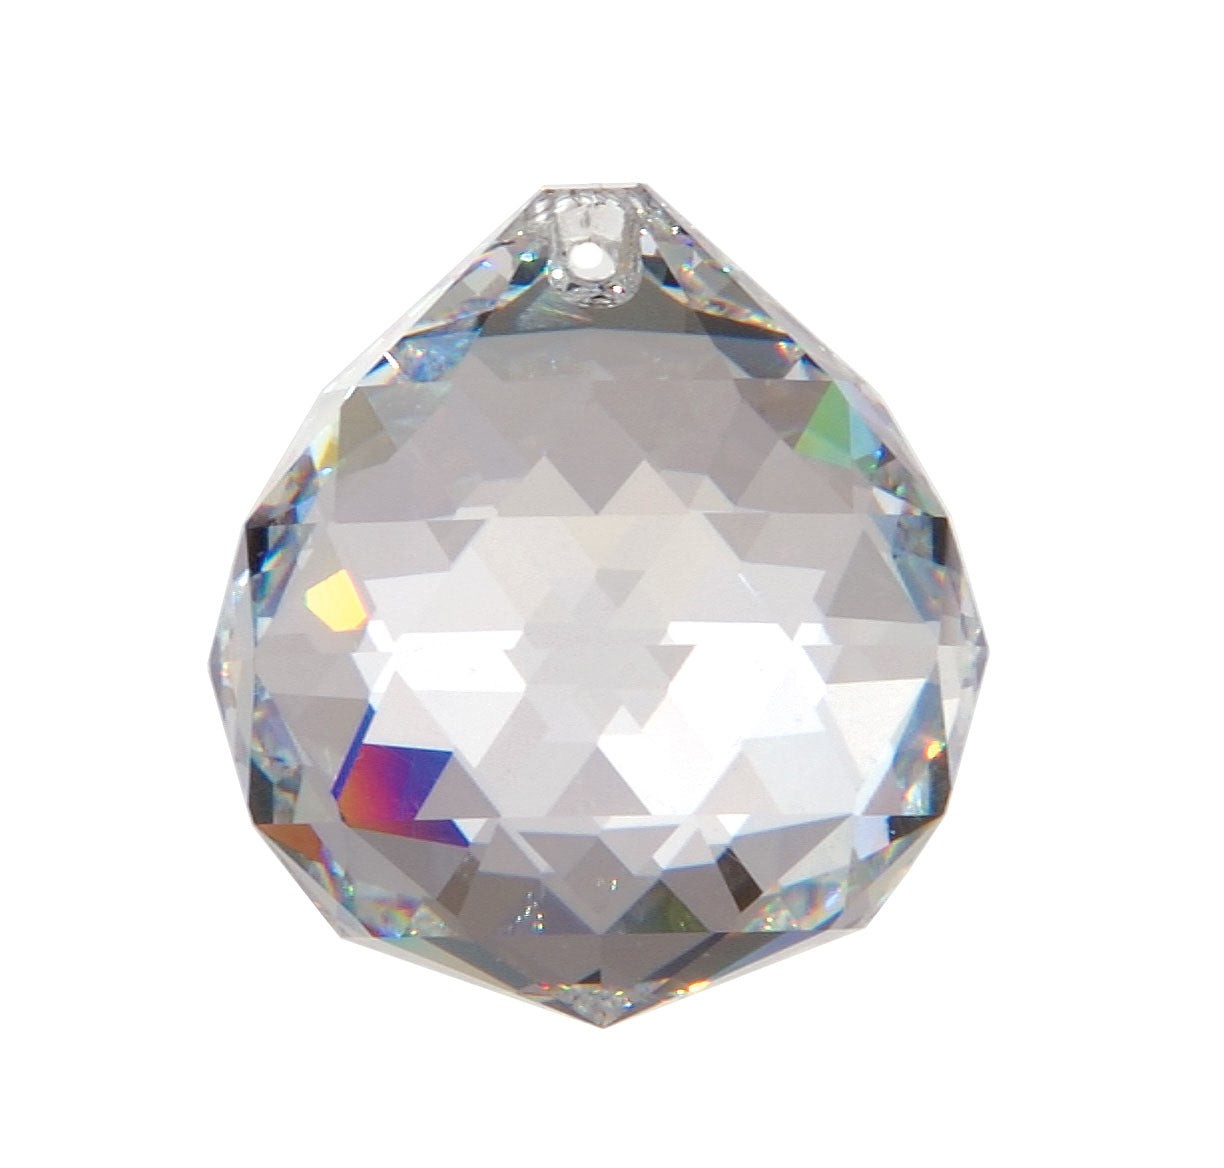 BrilliantCut Faceted Ball, available in 3/4", 1-3/16", 1-5/8", or 2"